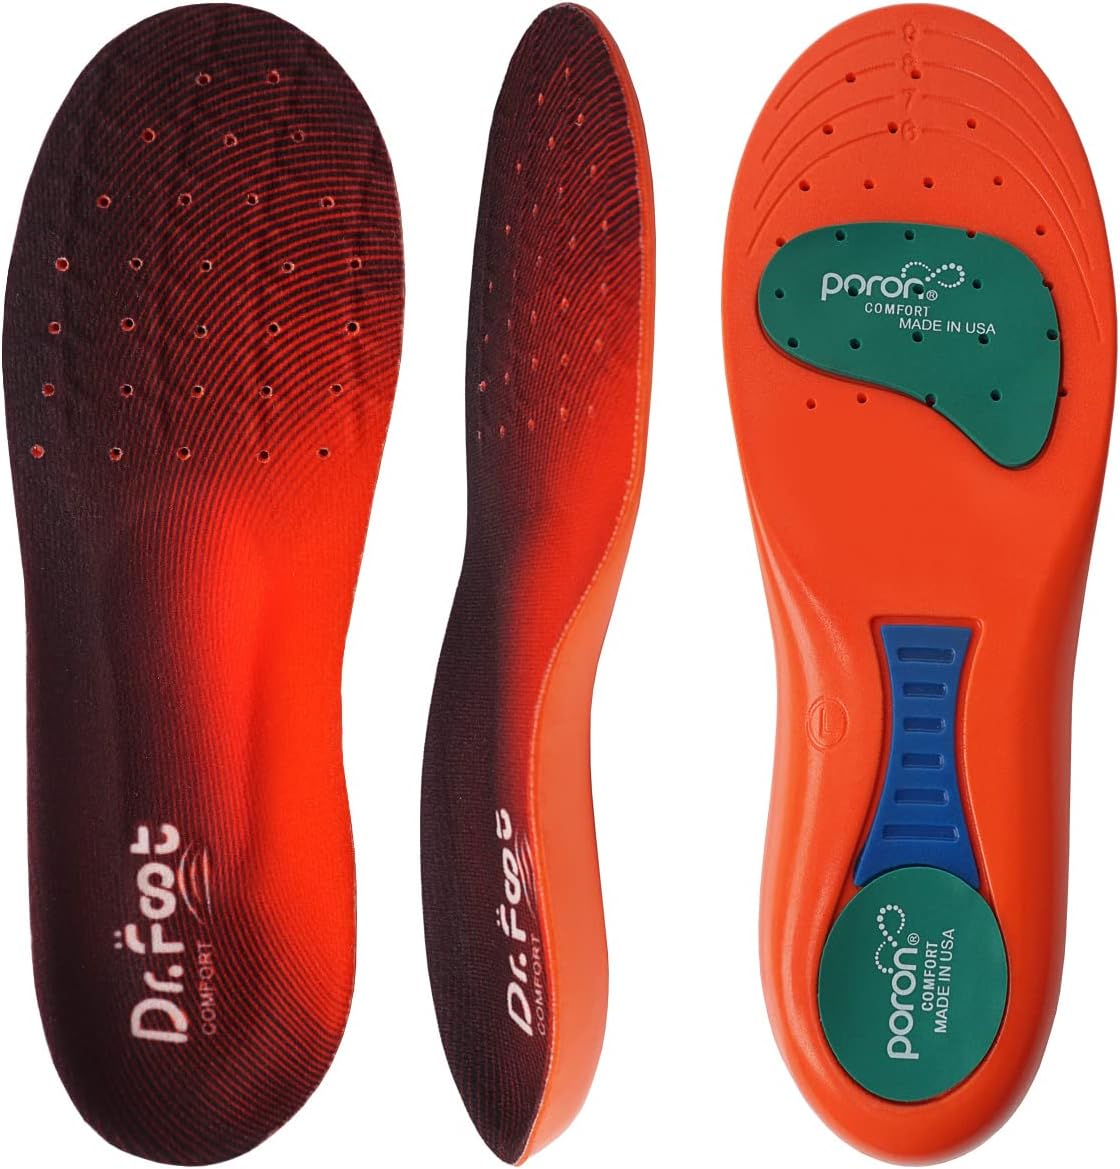 Dr. Foot Plantar Fasciitis Insoles for Women Men and Kids - Provide Shock Absorption and Cushioning - Comfortable Insoles for Flat Feet, Feet Pain, Heel Pain and Metatarsalgia (Medium)